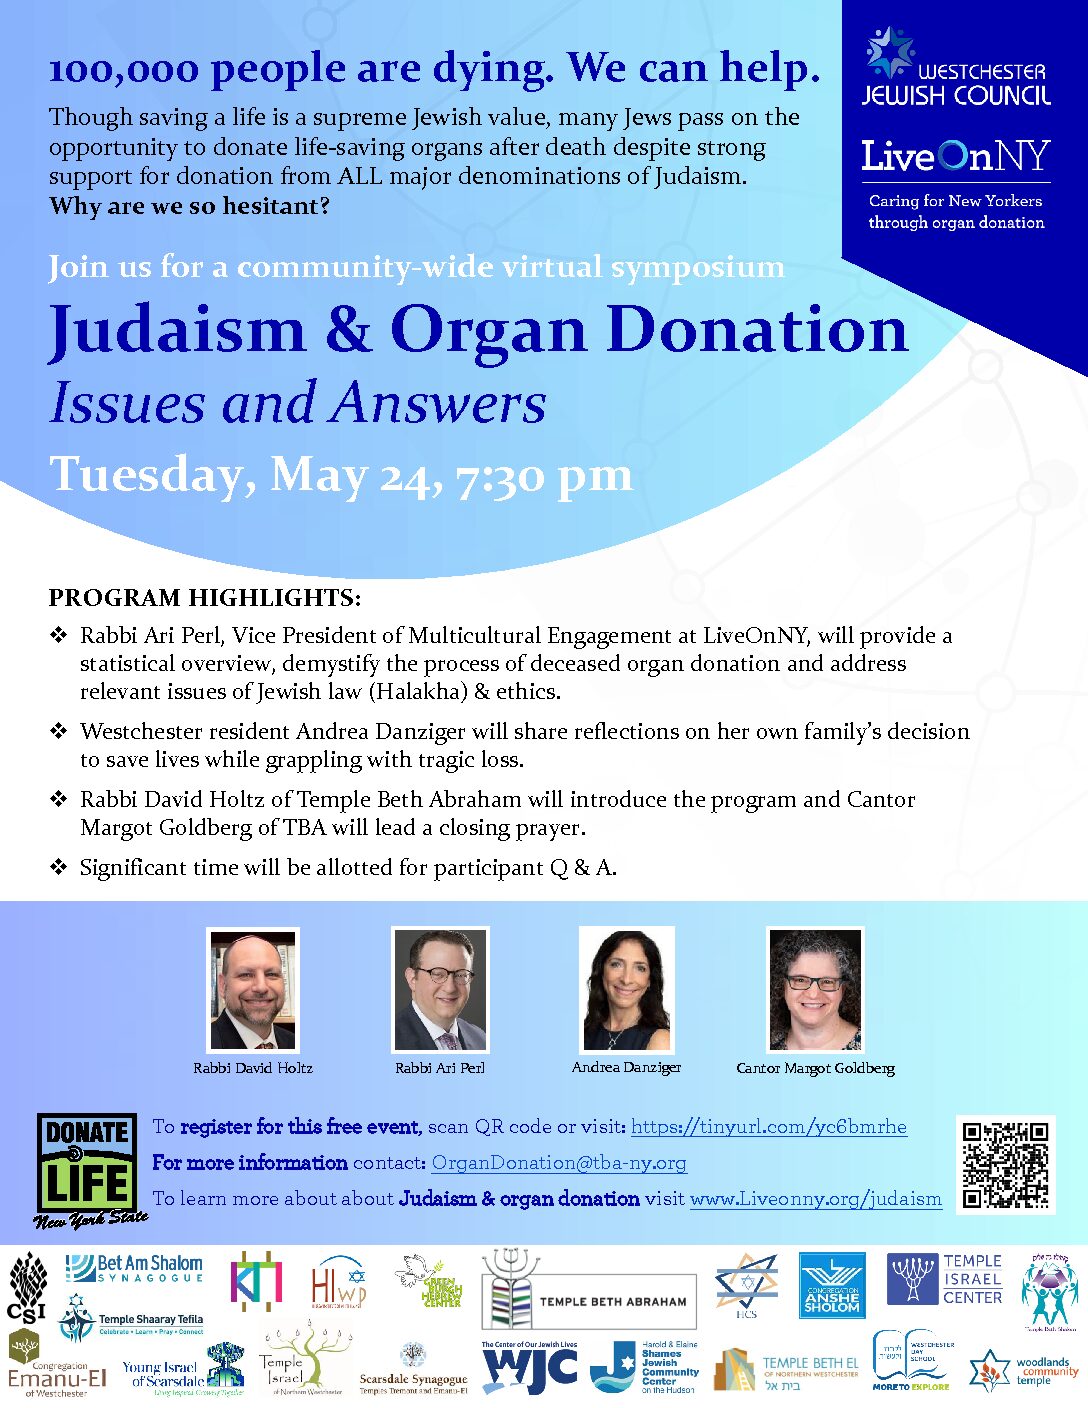 LiveOnNY Judaism & Organ Donation Issues and Answers